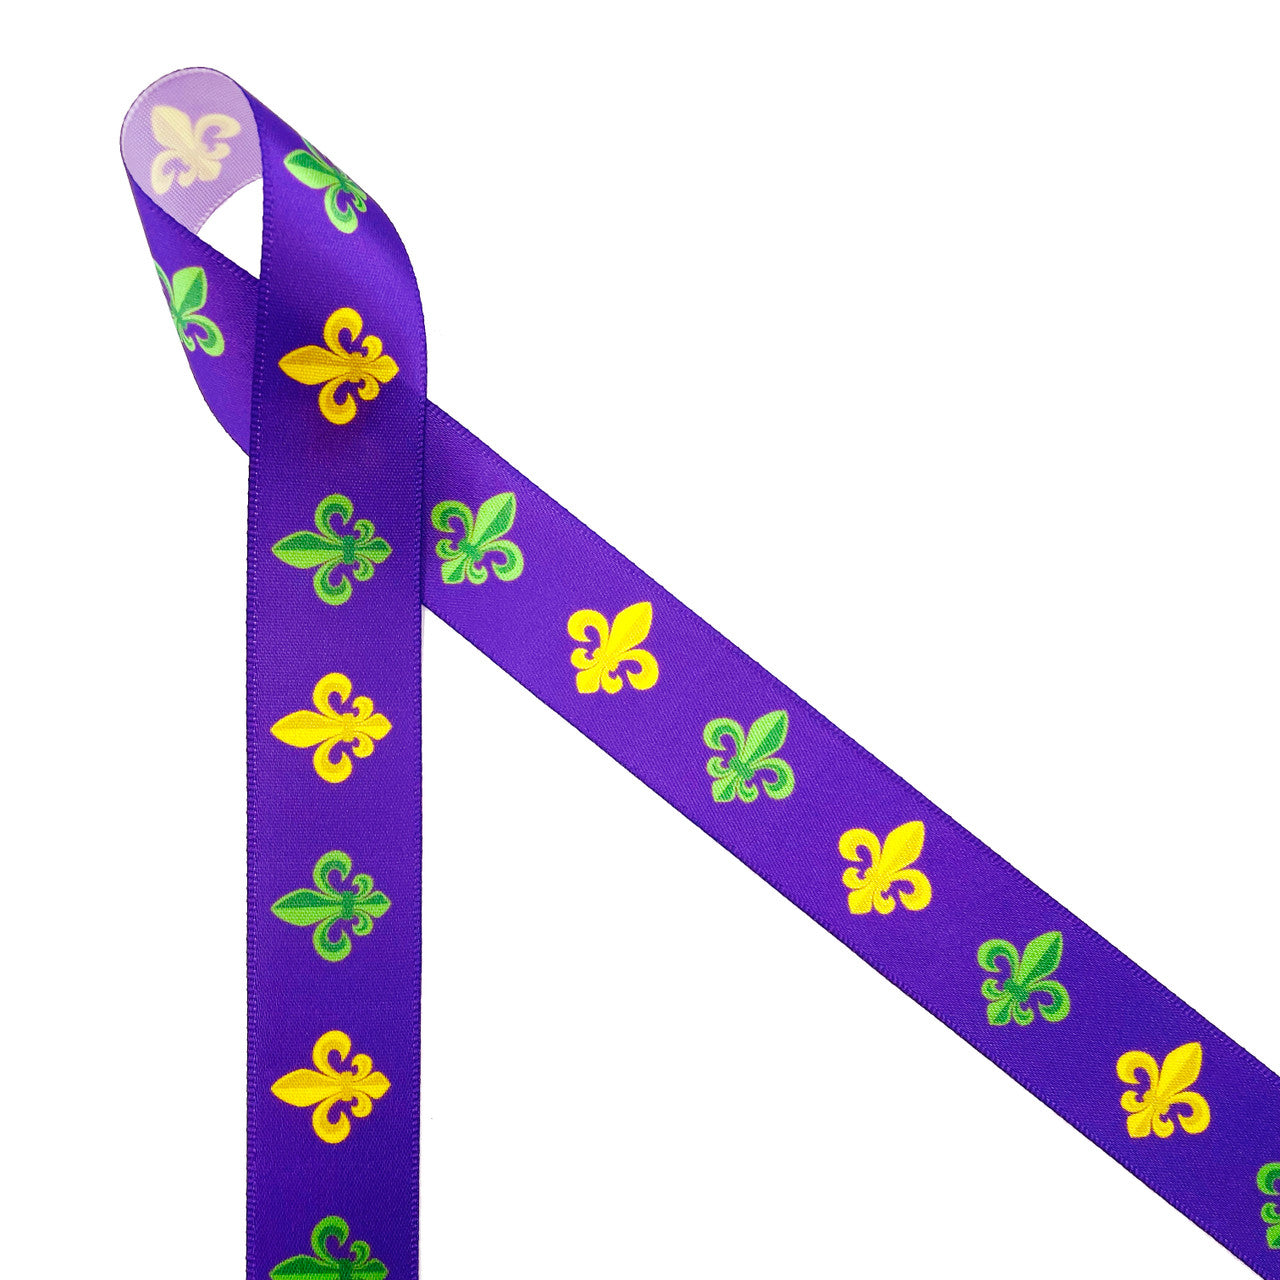 Mardi Gras ribbon featuring fleur de lis in green and yellow on a purple background printed on 7/8" white single face satin is and elegant design for Mardi Gras and Fat Tuesday celebrations. This beautiful ribbon is idea for gift wrap, gift baskets, party decor, table scapes, floral designs, cookies, cake pops, King Cakes, baked goods and candy shops. This is a great ribbon for Mardi Gras themed crafts, sewing projects and quilting. All our  ribbon is designed and printed in the USA